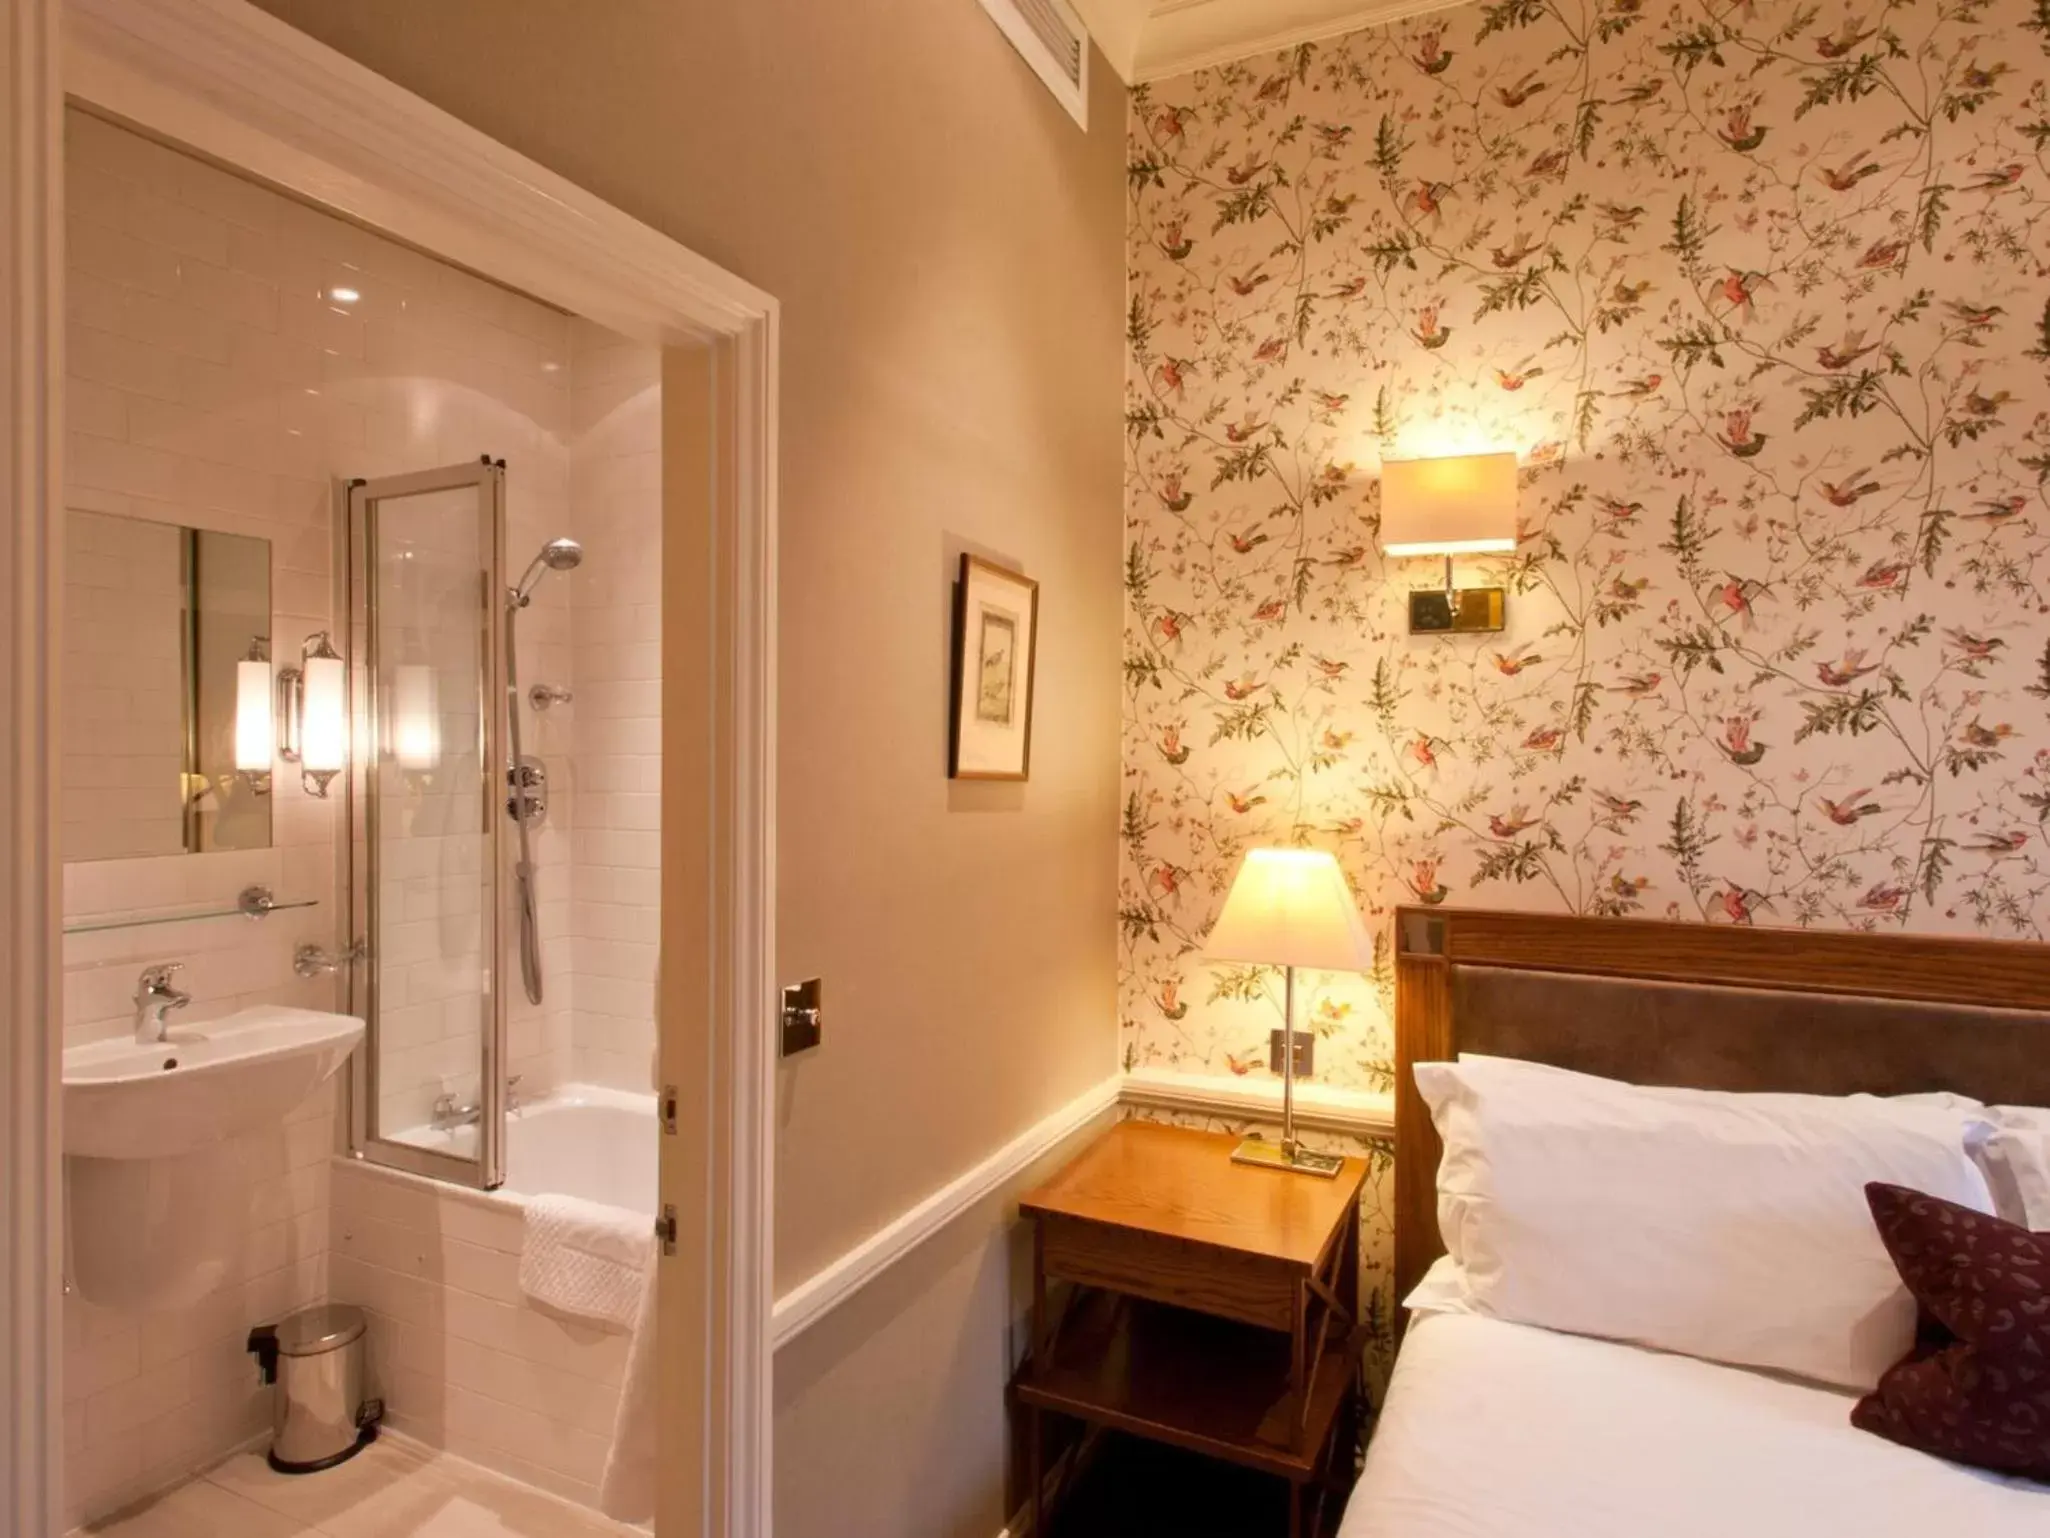 Bathroom in St Michael's Manor Hotel - St Albans